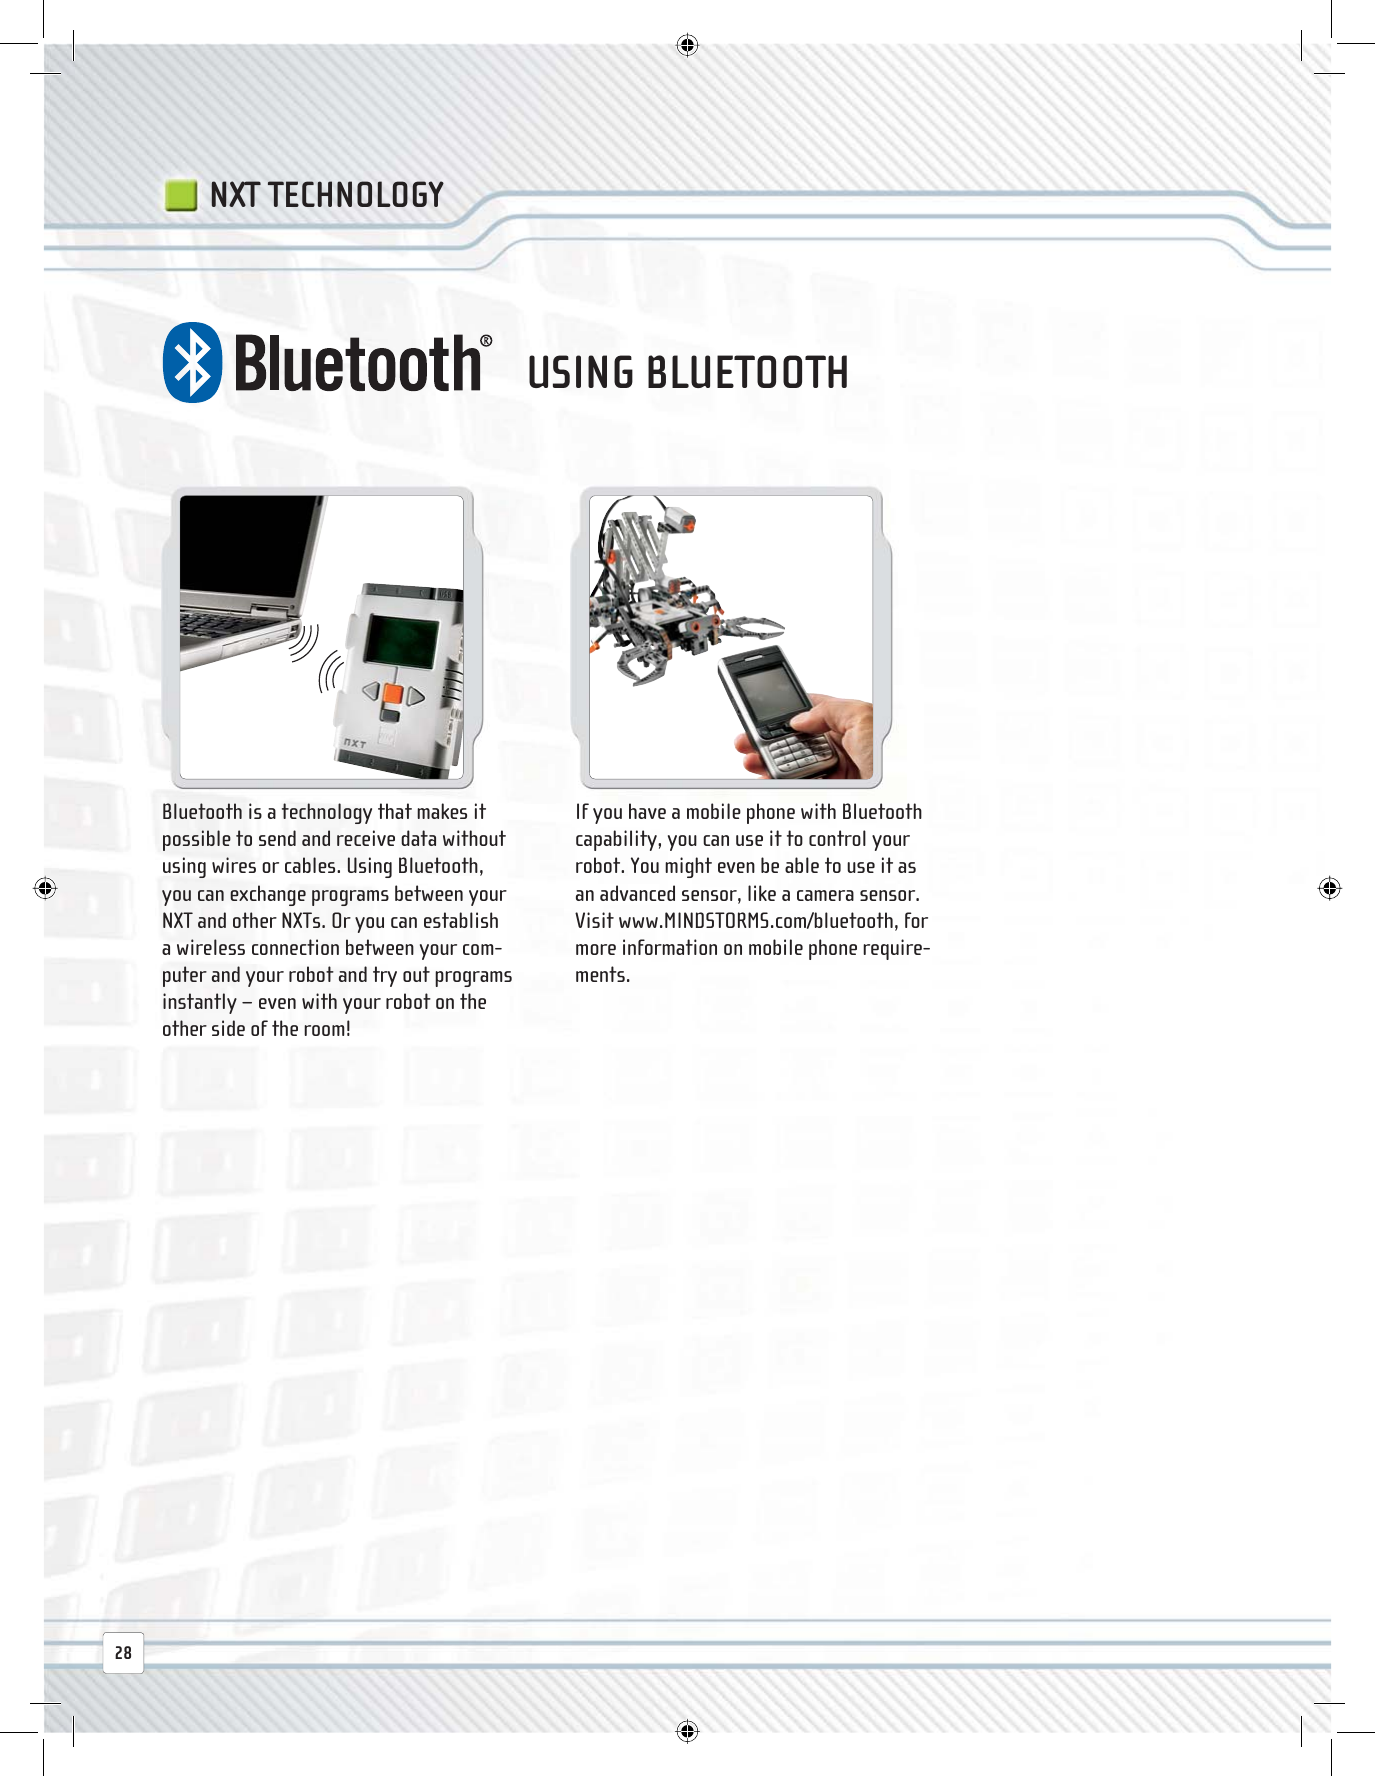 28NXT TECHNOLOGYBluetooth is a technology that makes it possible to send and receive data without using wires or cables. Using Bluetooth, you can exchange programs between your NXT and other NXTs. Or you can establish a wireless connection between your com-puter and your robot and try out programs instantly − even with your robot on the other side of the room!If you have a mobile phone with Bluetooth capability, you can use it to control your robot. You might even be able to use it as an advanced sensor, like a camera sensor. Visit www.MINDSTORMS.com/bluetooth, for more information on mobile phone require-ments.USING BLUETOOTH